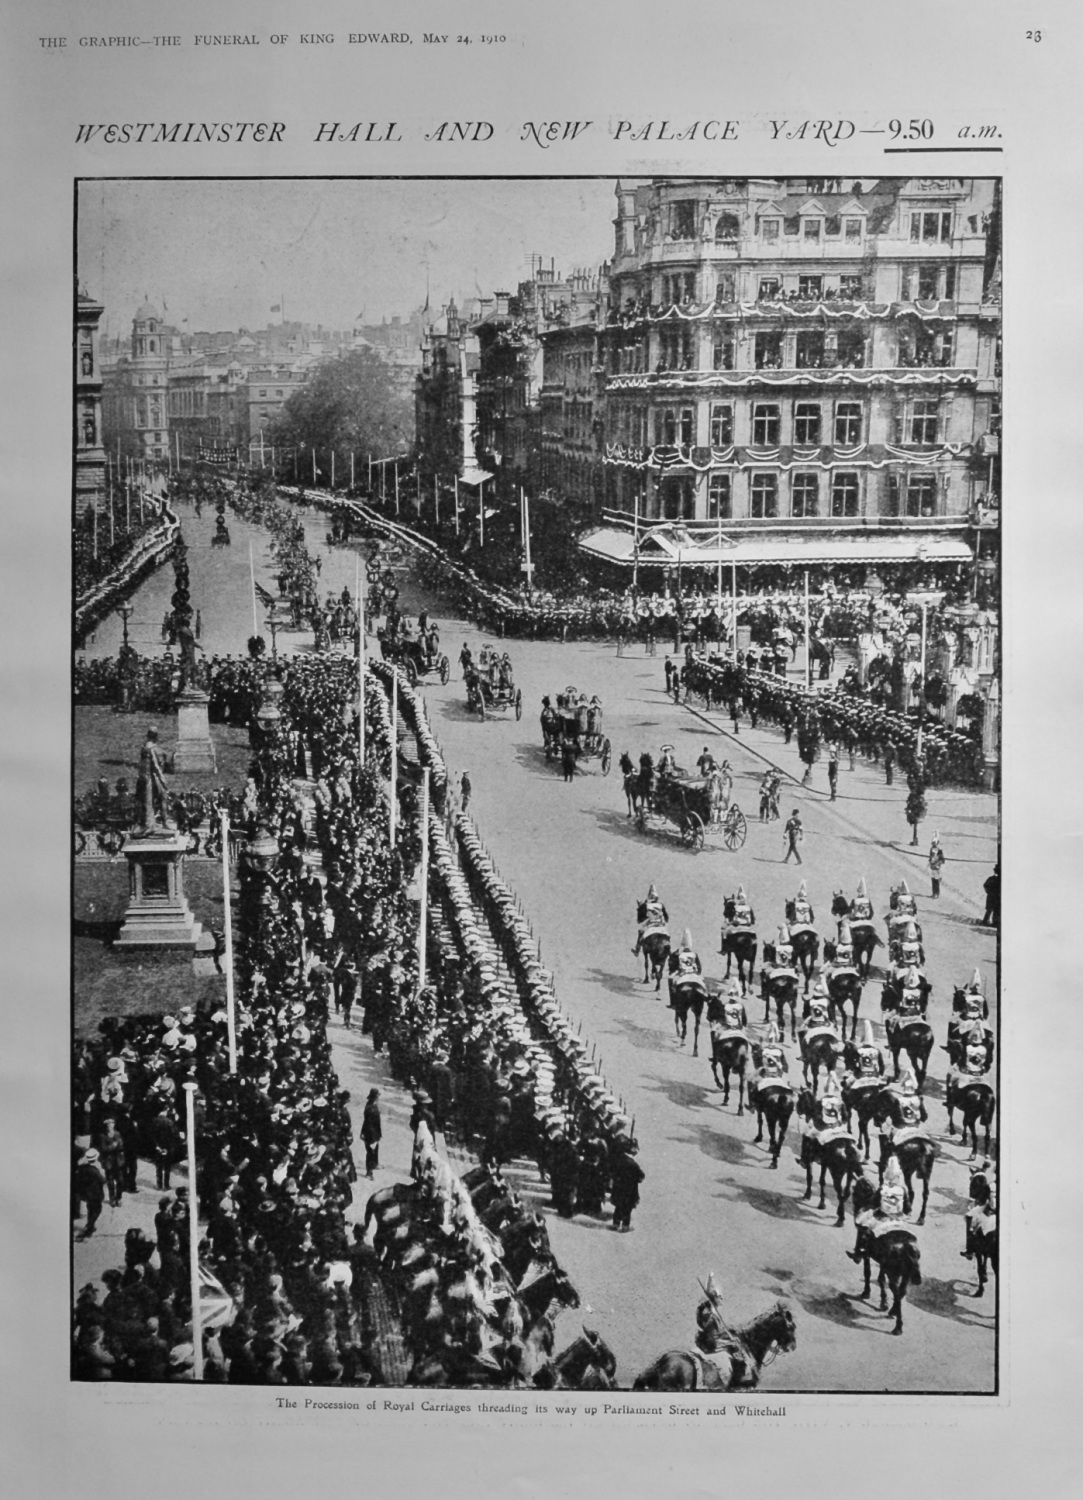 Westminster Hall and New Palace Yard - 9.50  a.m.  (Funeral of King Edward 